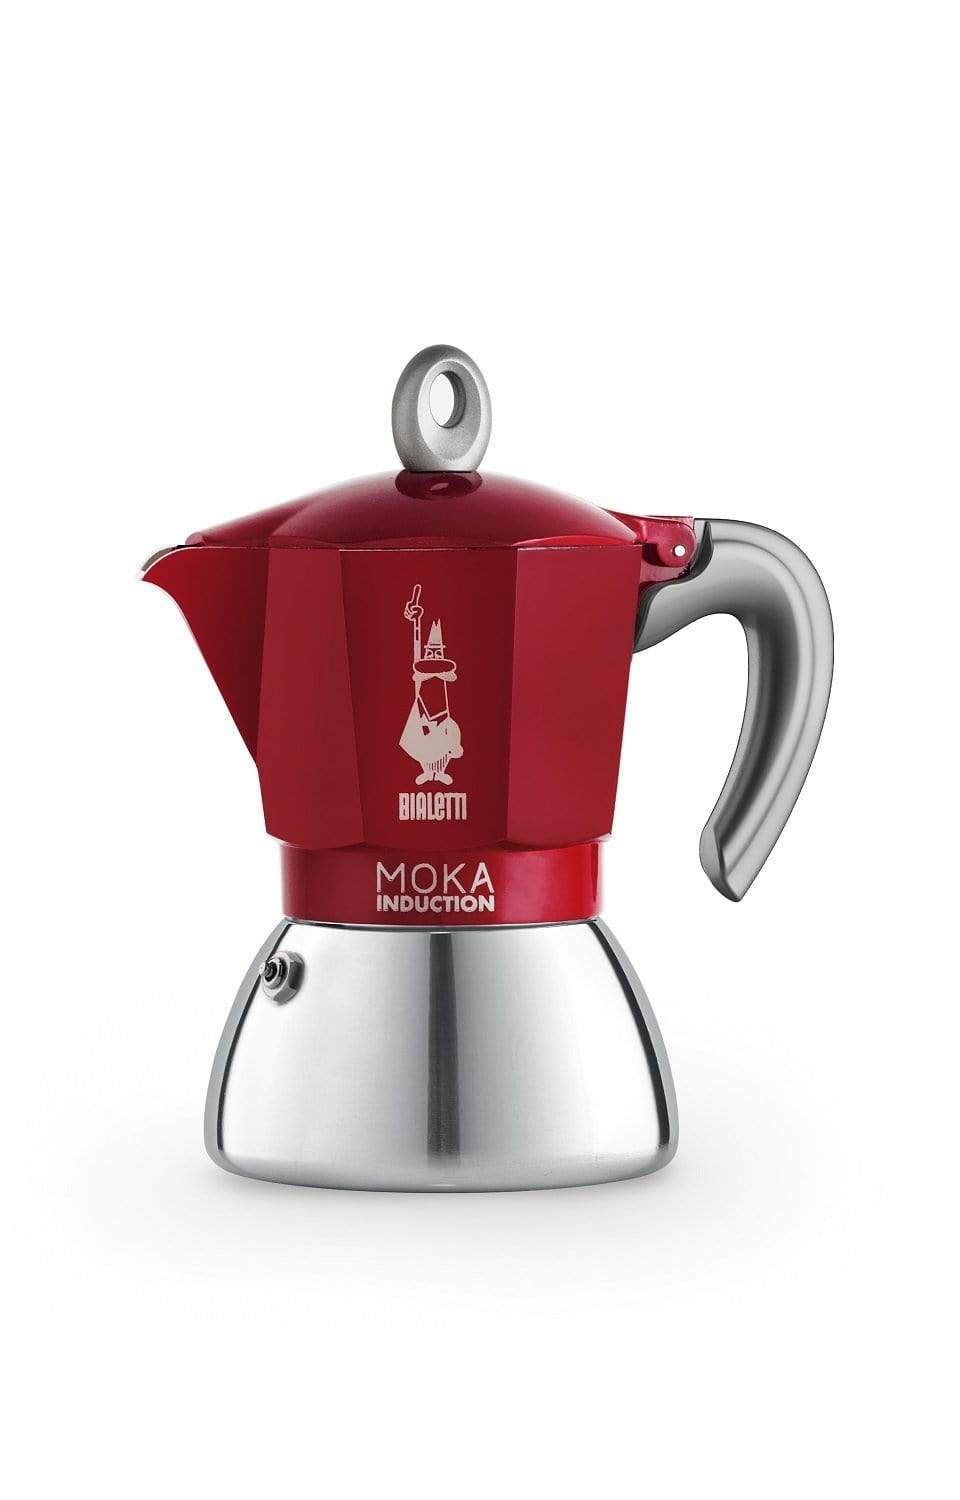 BIALETTI NEW MOKA INDUCTION COFFEE MAKER RED 6 CUPS - 6946